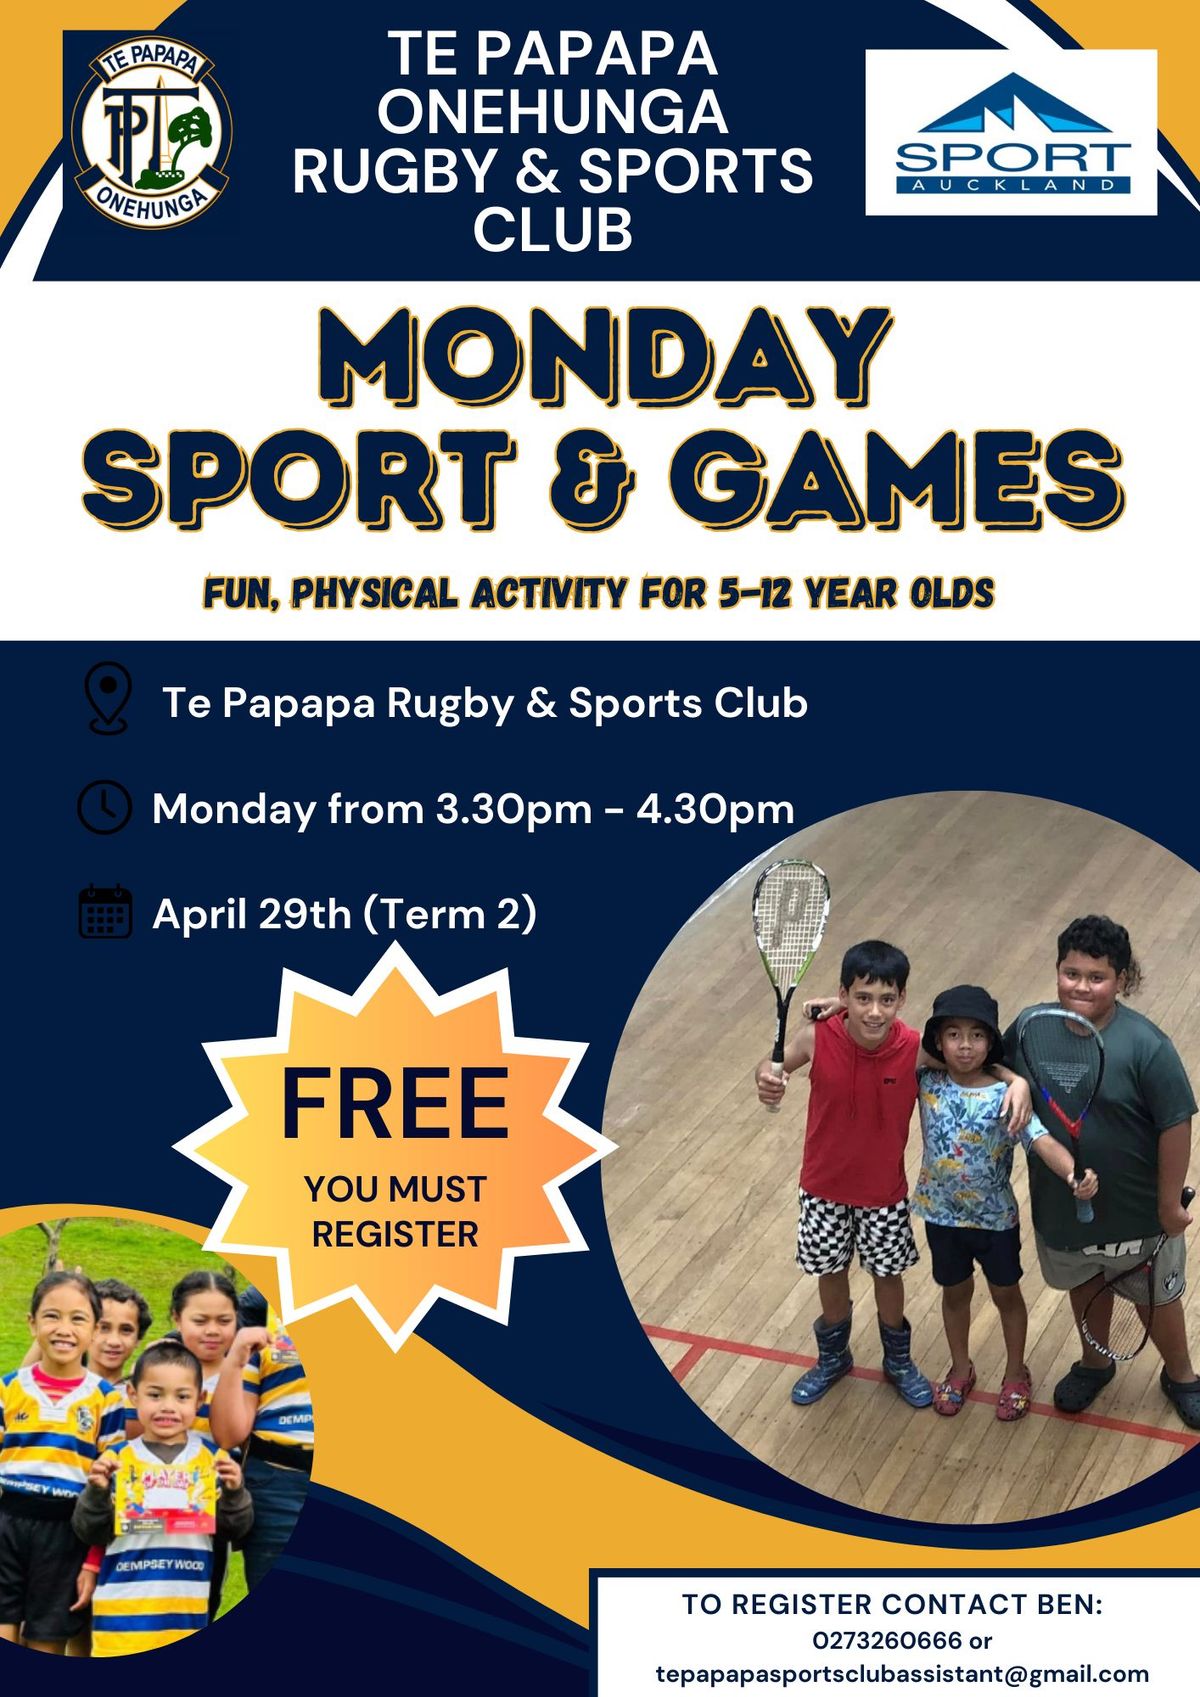 FREE Monday Sport & Games at Fergusson Domain 